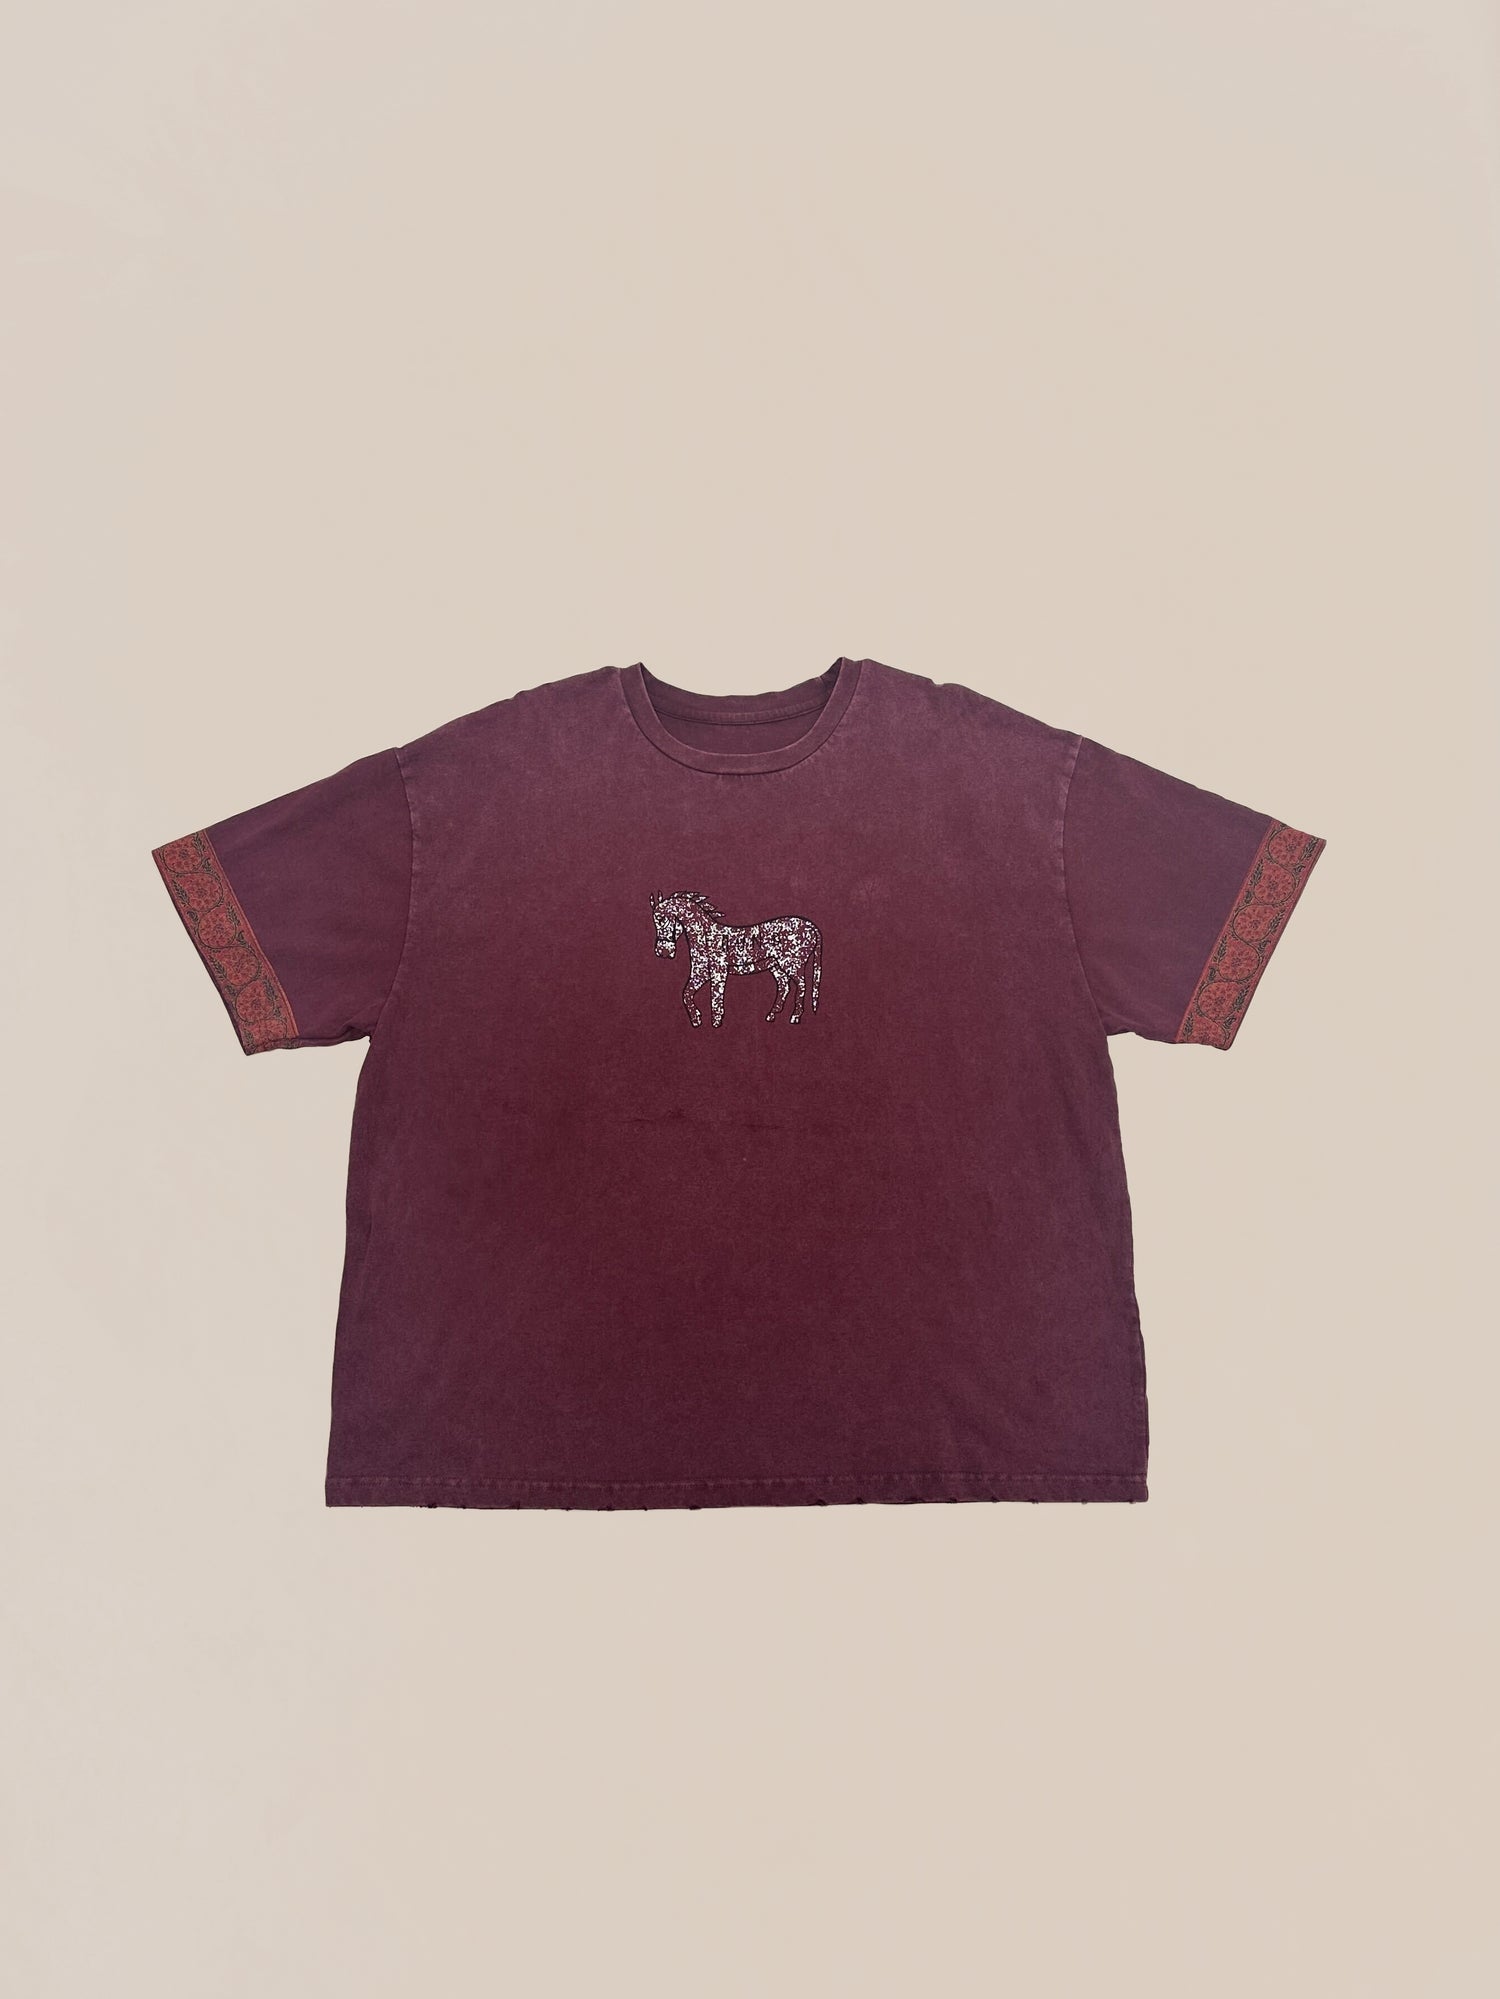 Burgundy 100% Cotton Sample 77 t-shirt with horse embellishment on chest and patterned sleeve detail by Profound.